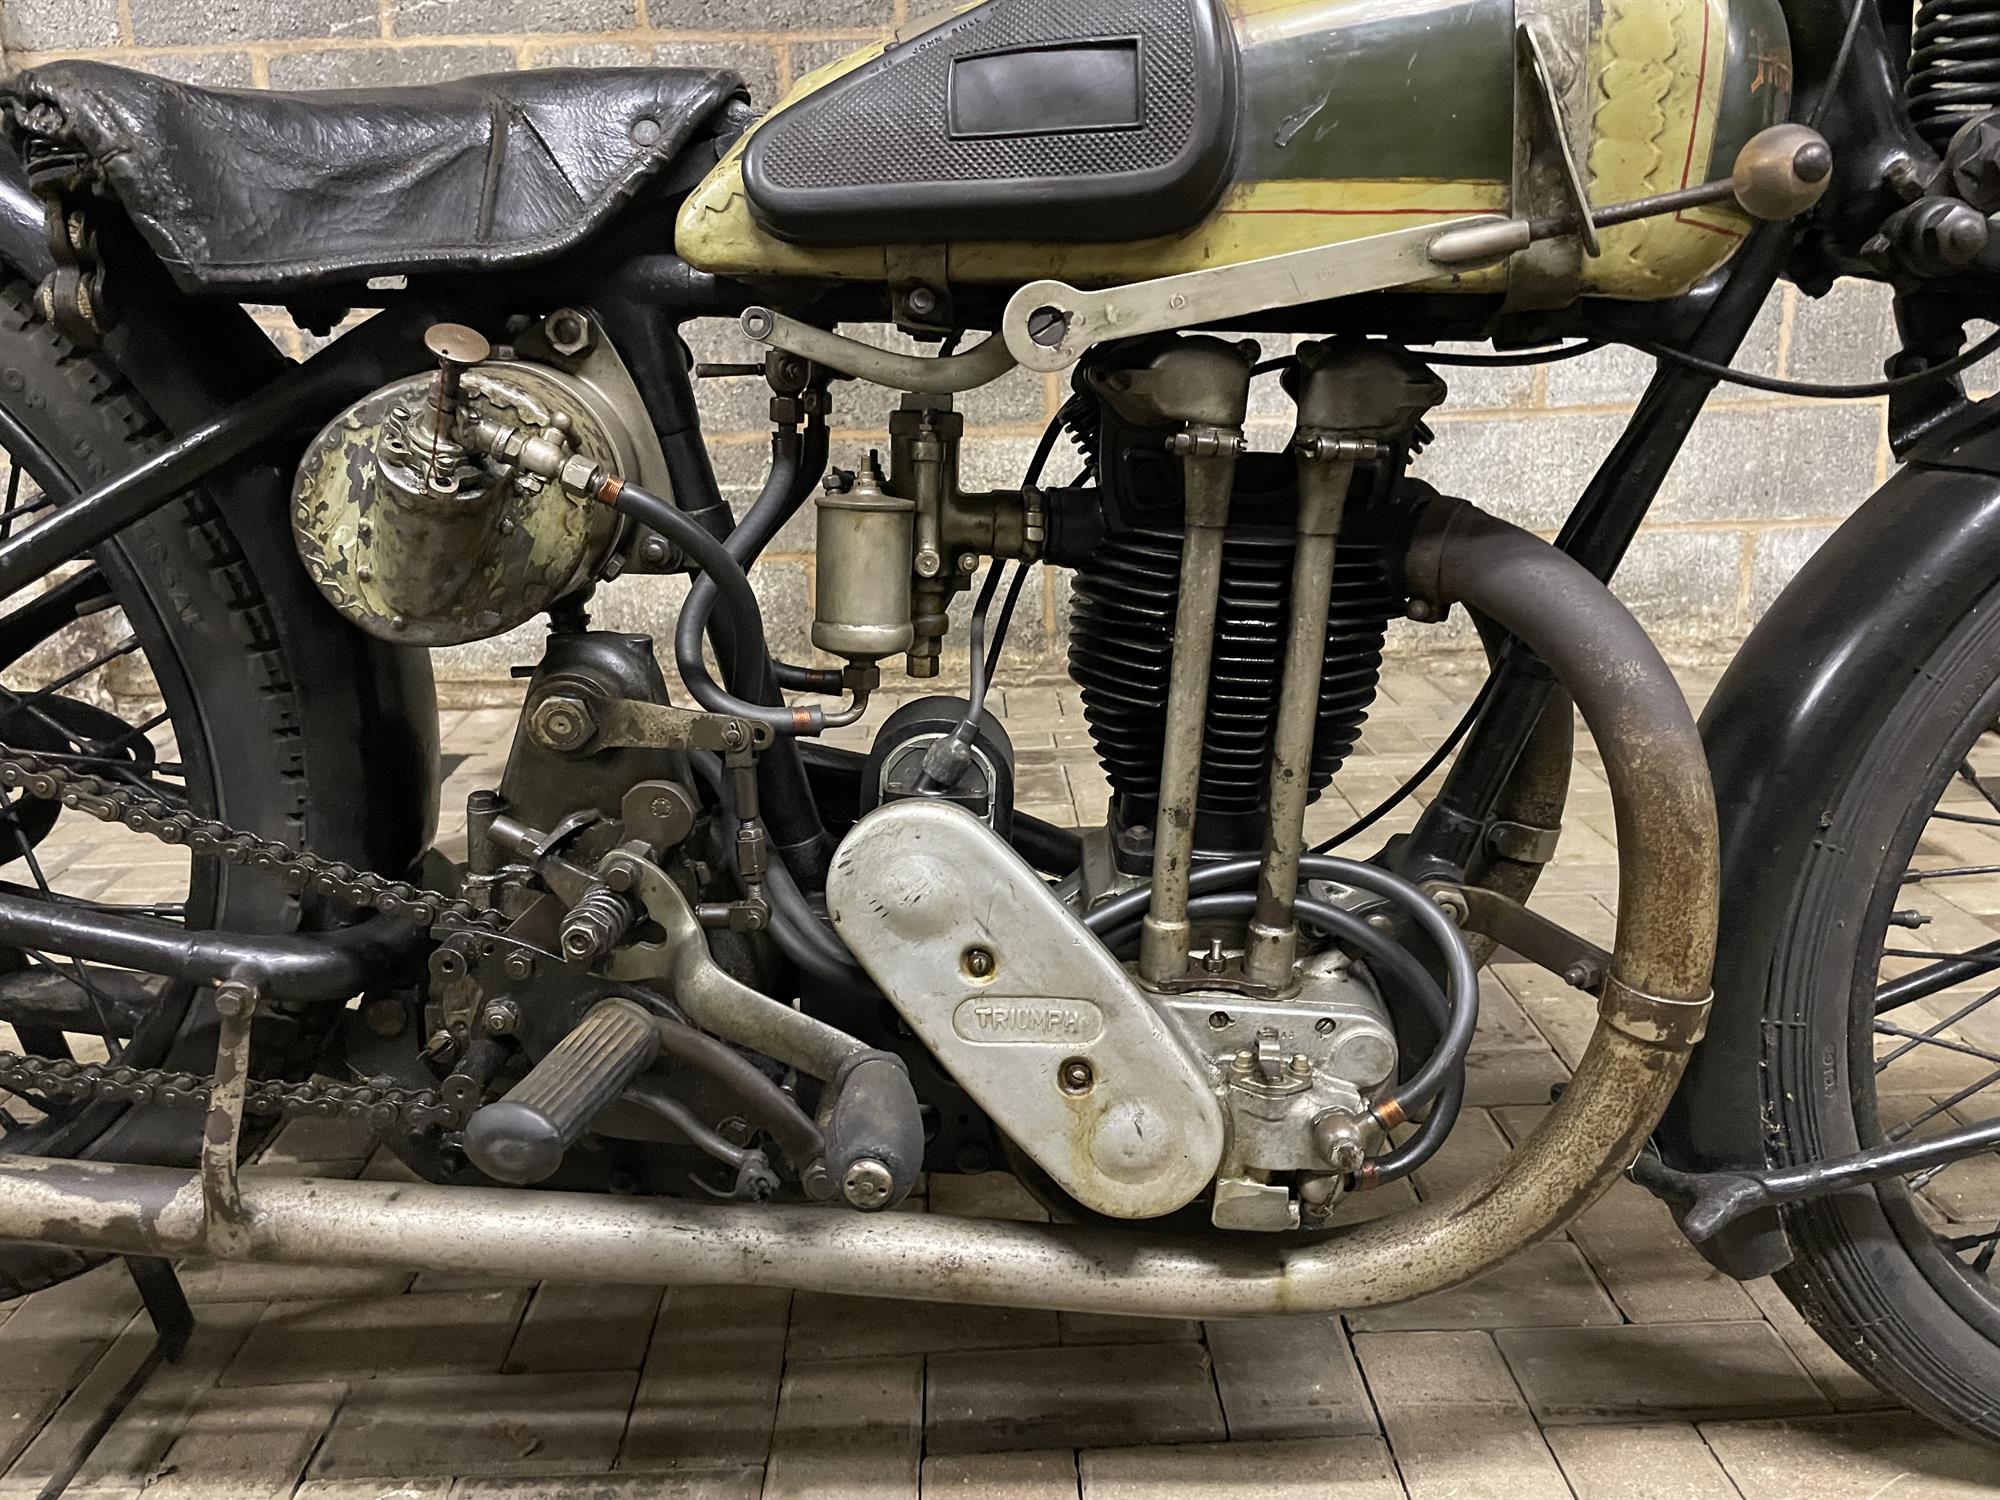 1927 Triumph Works TT Racing Motorcycle 489cc - Image 3 of 10